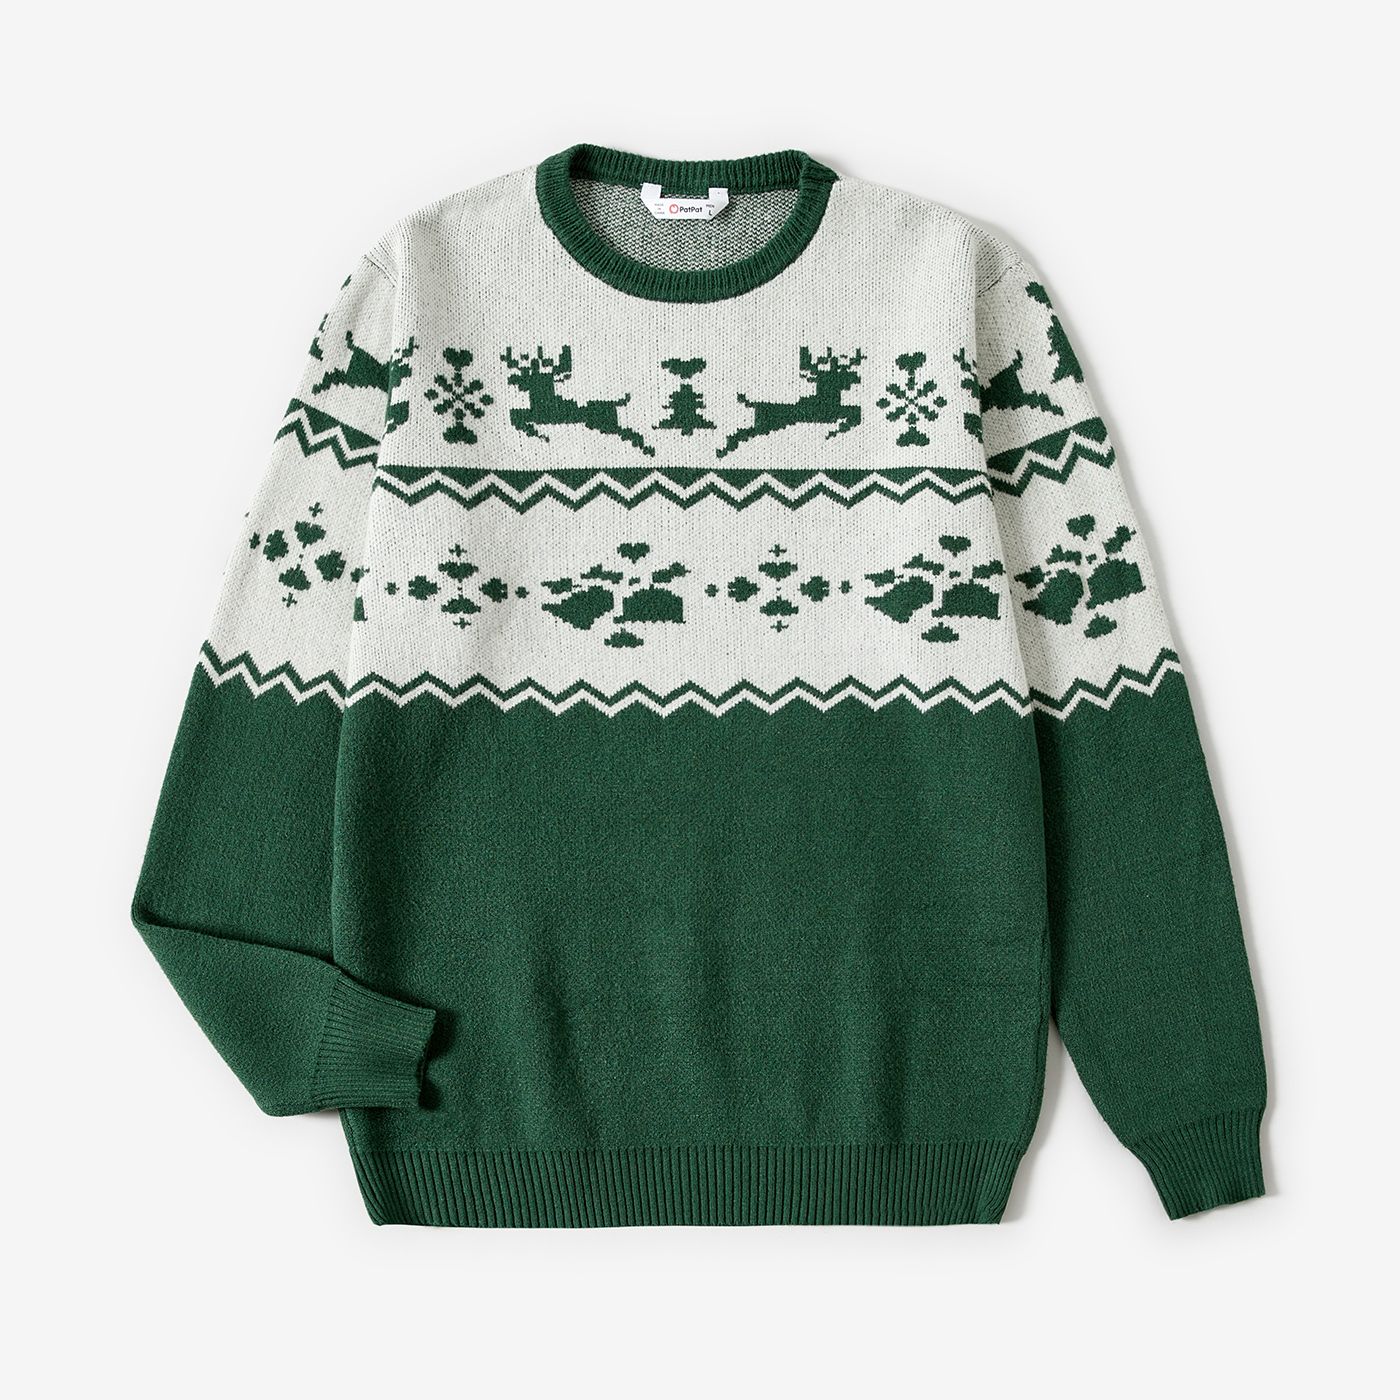 Christmas Family Matching Green Reindeer Print Long-sleeve Knitted Tops